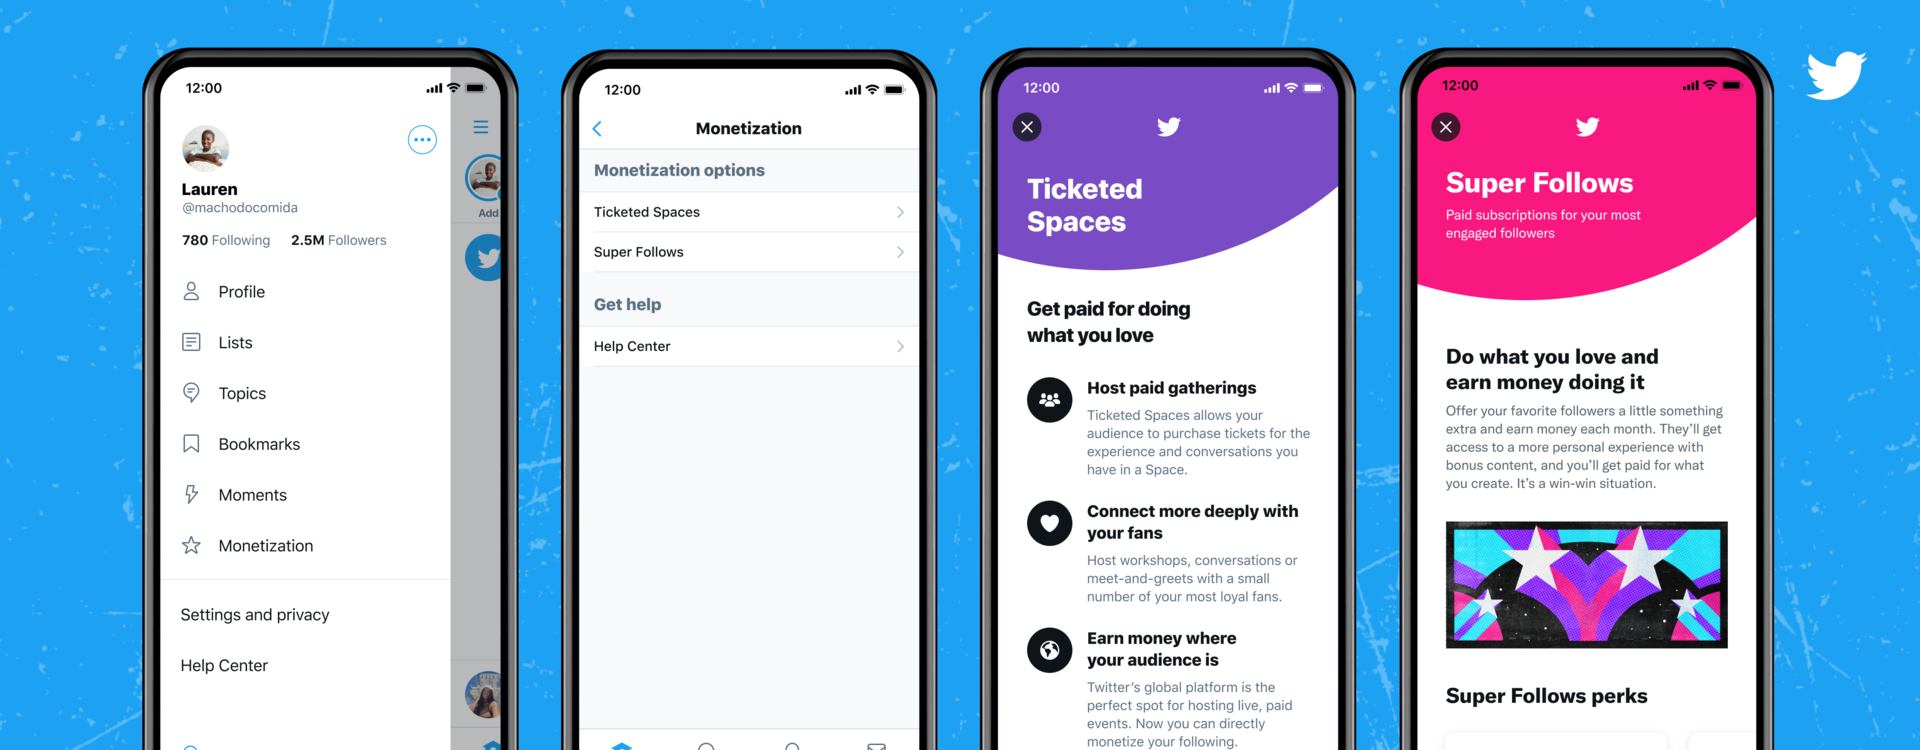 Twitter launches Super Follows and Ticketed Spaces